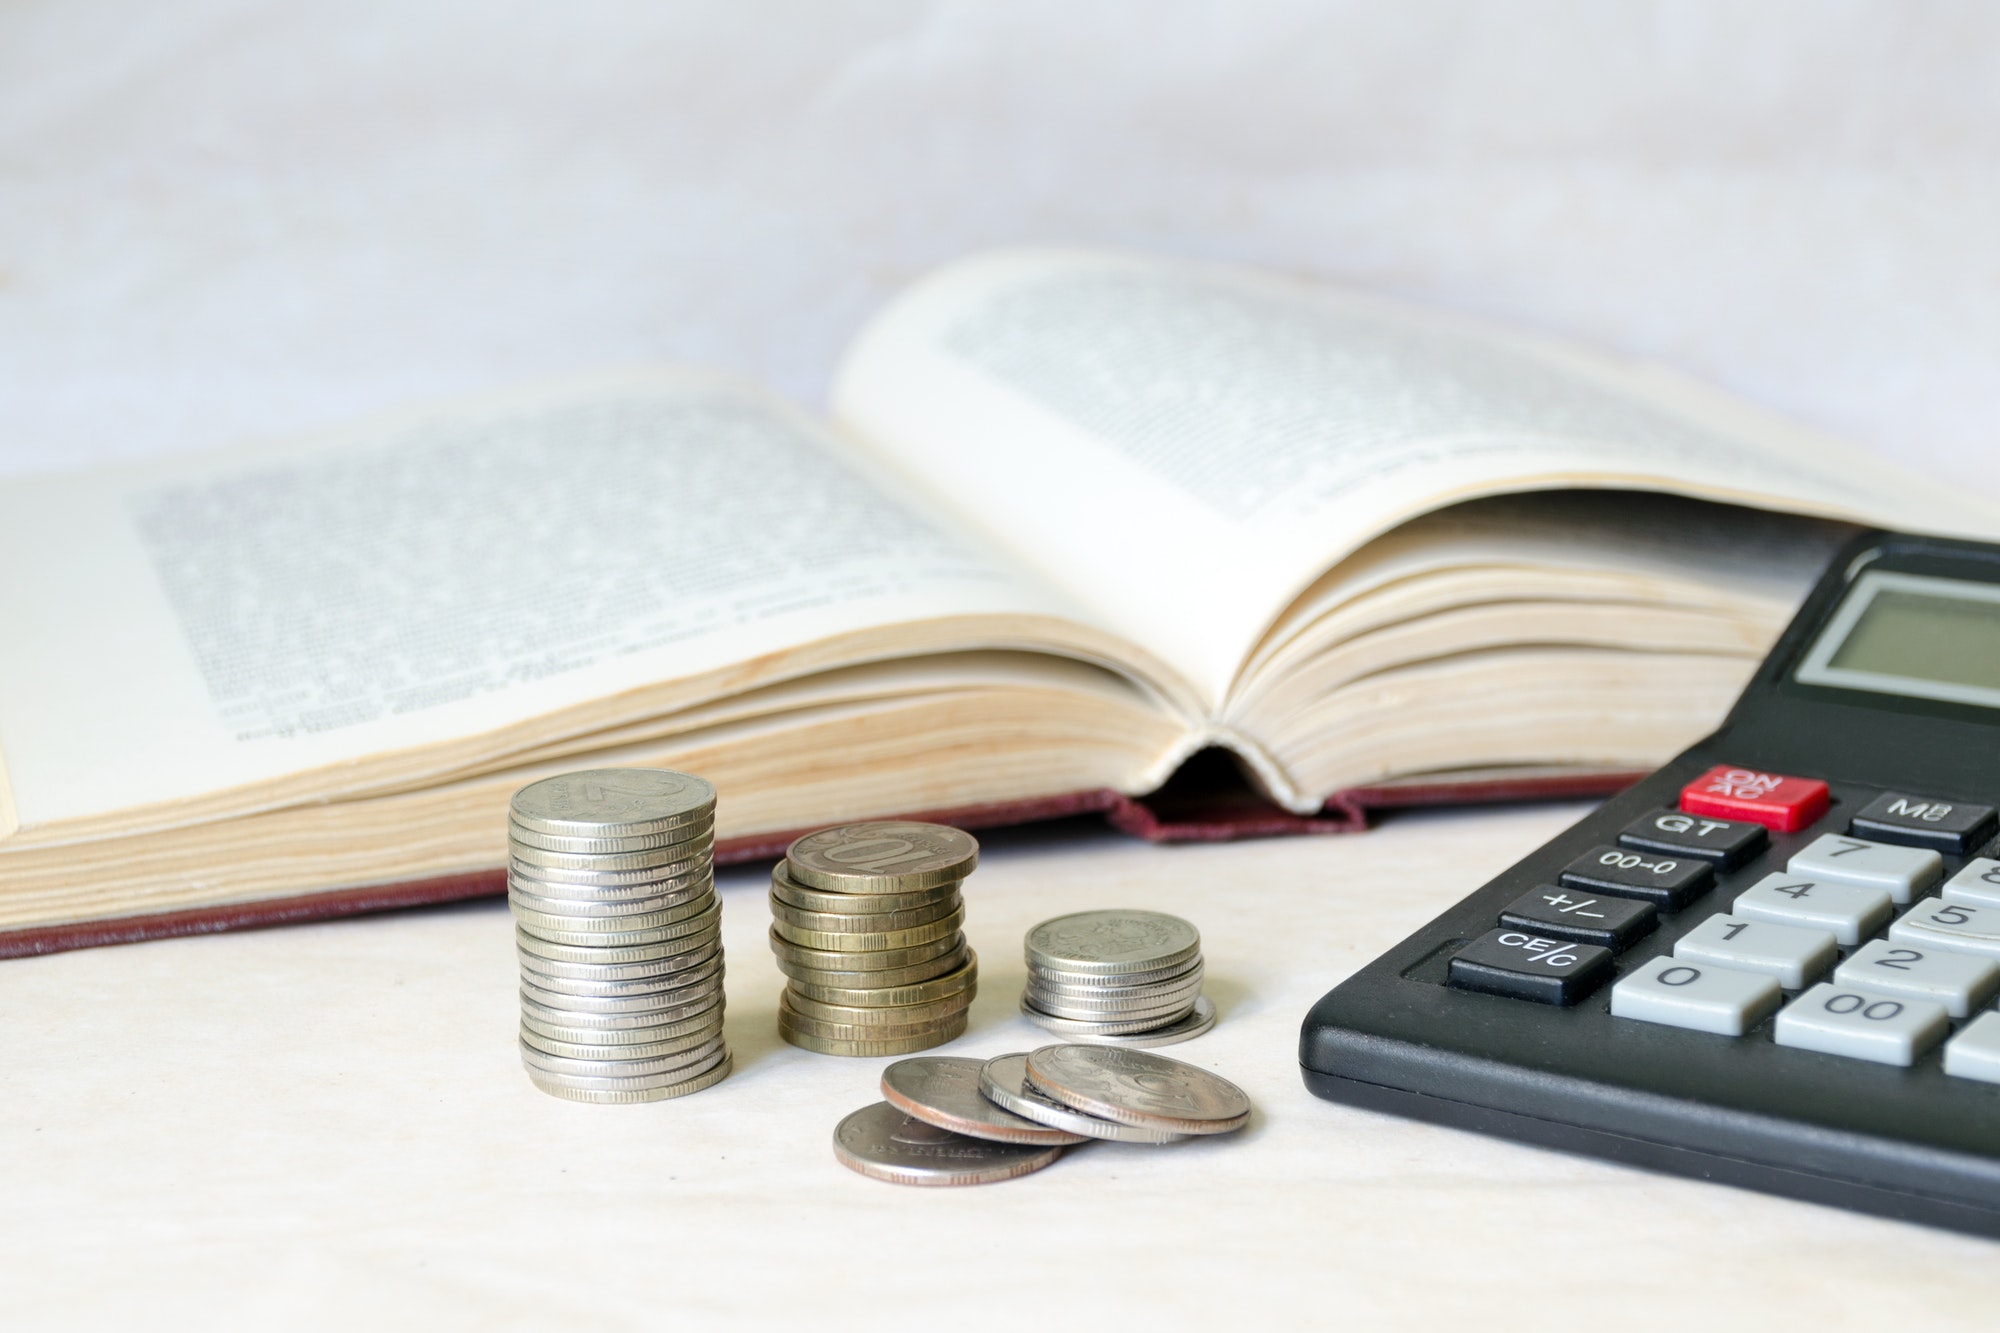 a stack of coins and a calculator in front of an open book